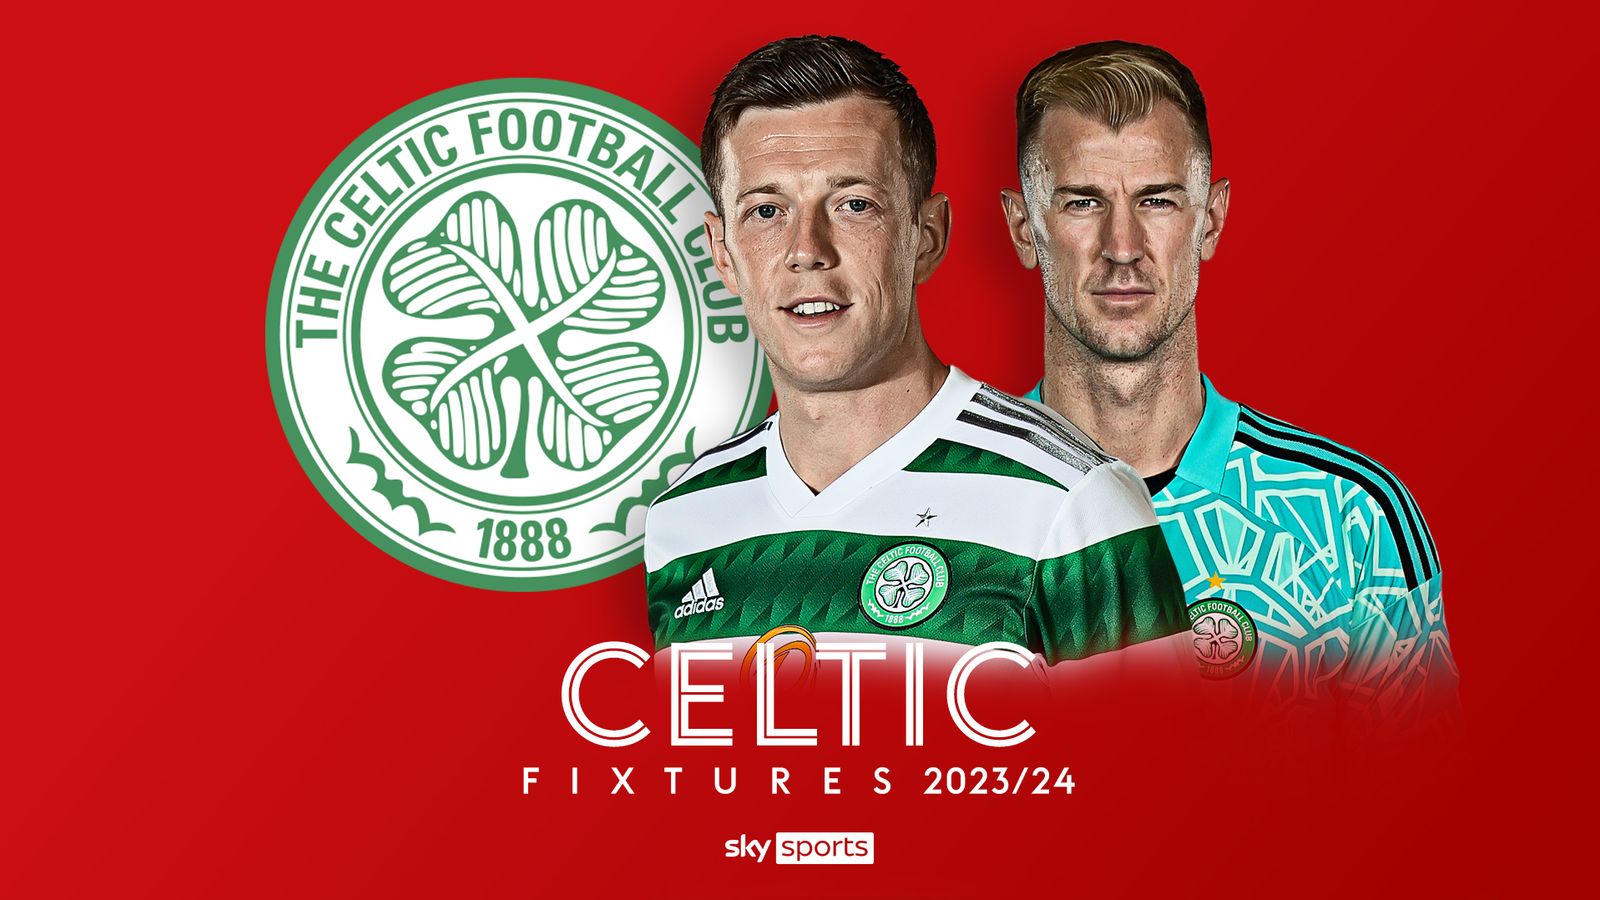 Exciting Celtic Fixtures and Schedule Revealed for Scottish Premiership